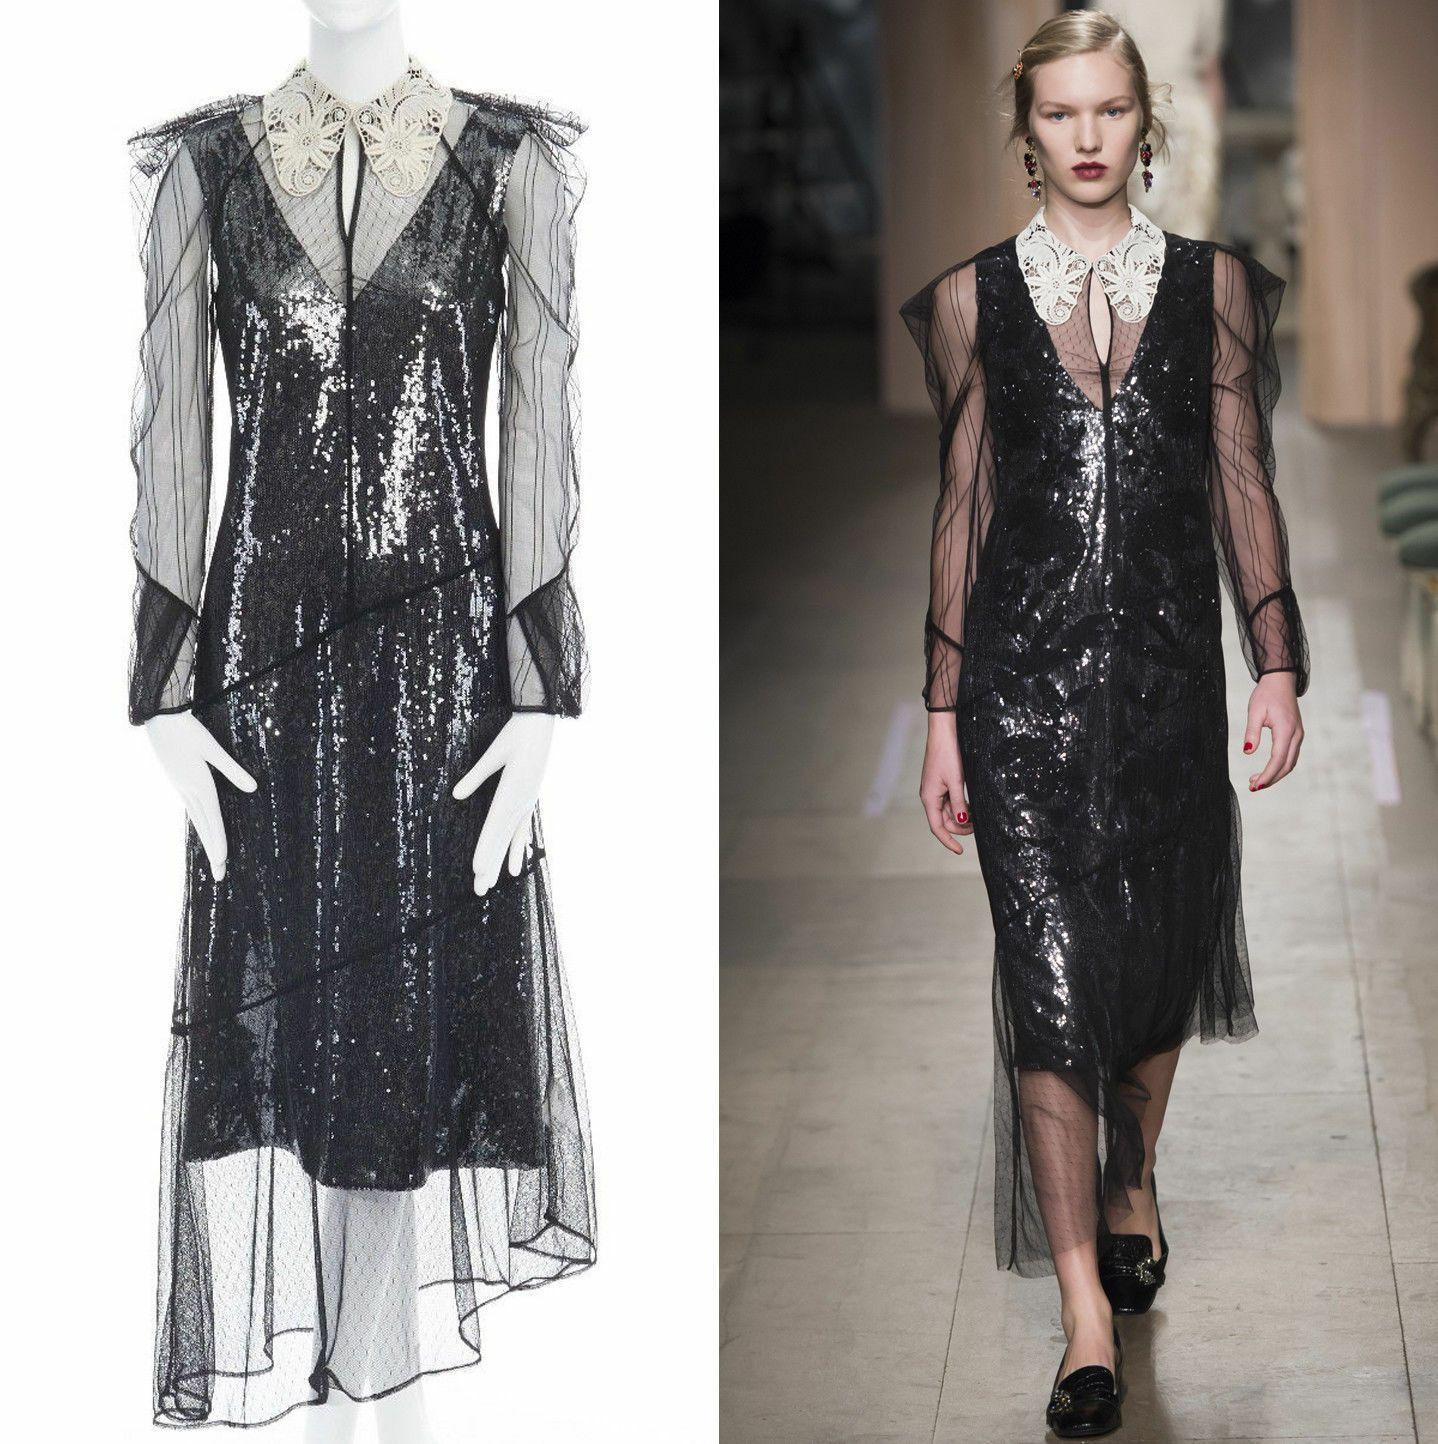 new ERDEM Runway AW16 silver sequins lined lace collar puff shoulder dress US4 S
ERDEM
FROM THE FALL WINTER 2016 RUNWAY
Silver sequins slip dress lining. 
Black mesh sheer outer. 
Cream lace oversized collar. 
Puff shoulder. 
Long sleeve. 
Diagonal